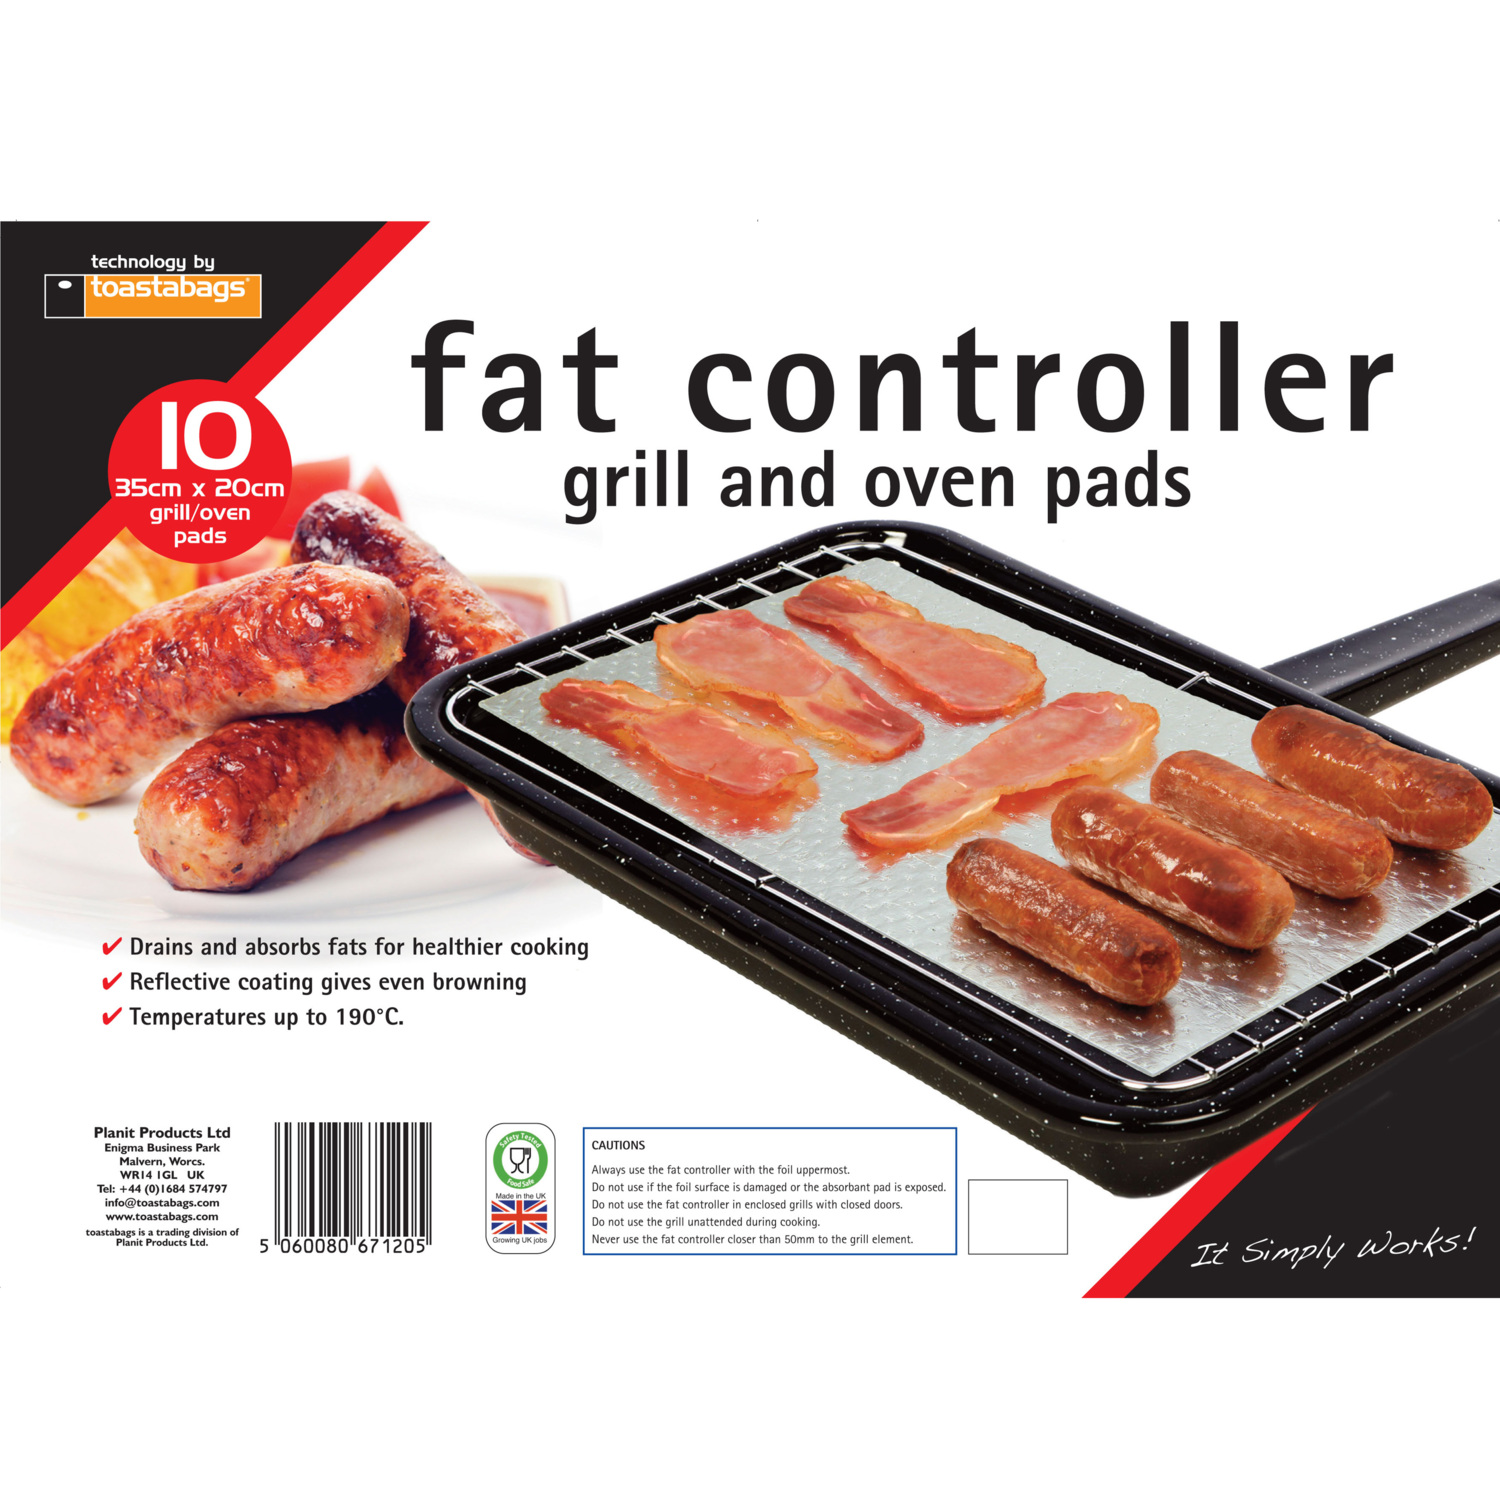 Fat Controller Grill And Oven Pads Image